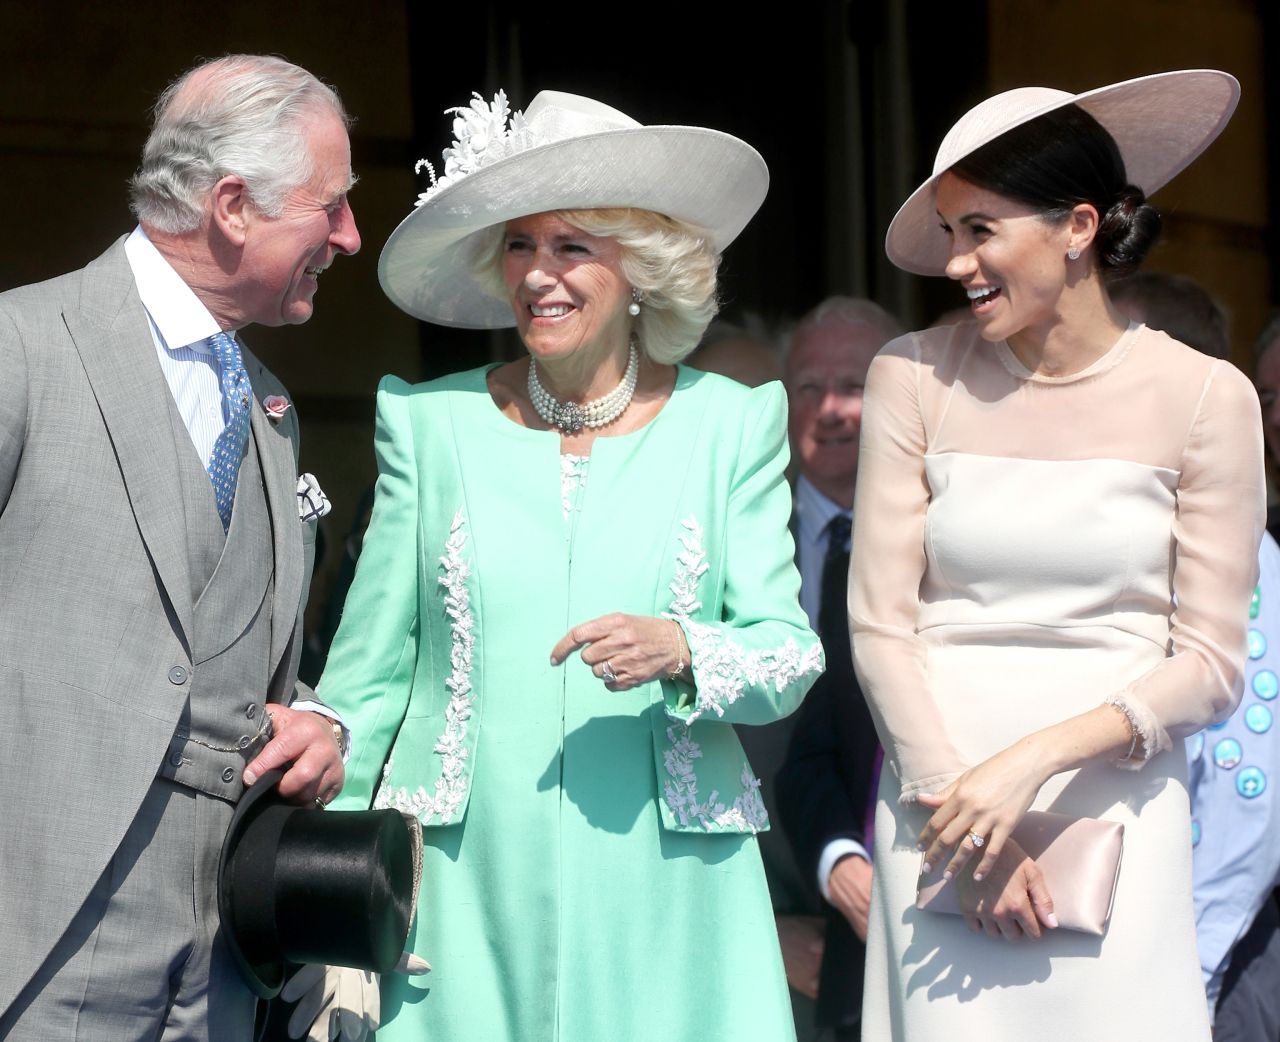 Charles, Camilla and Meghan, the Duchess of Sussex, attend Charles' 70th birthday patronage celebration held at Buckingham Palace in May 2018.